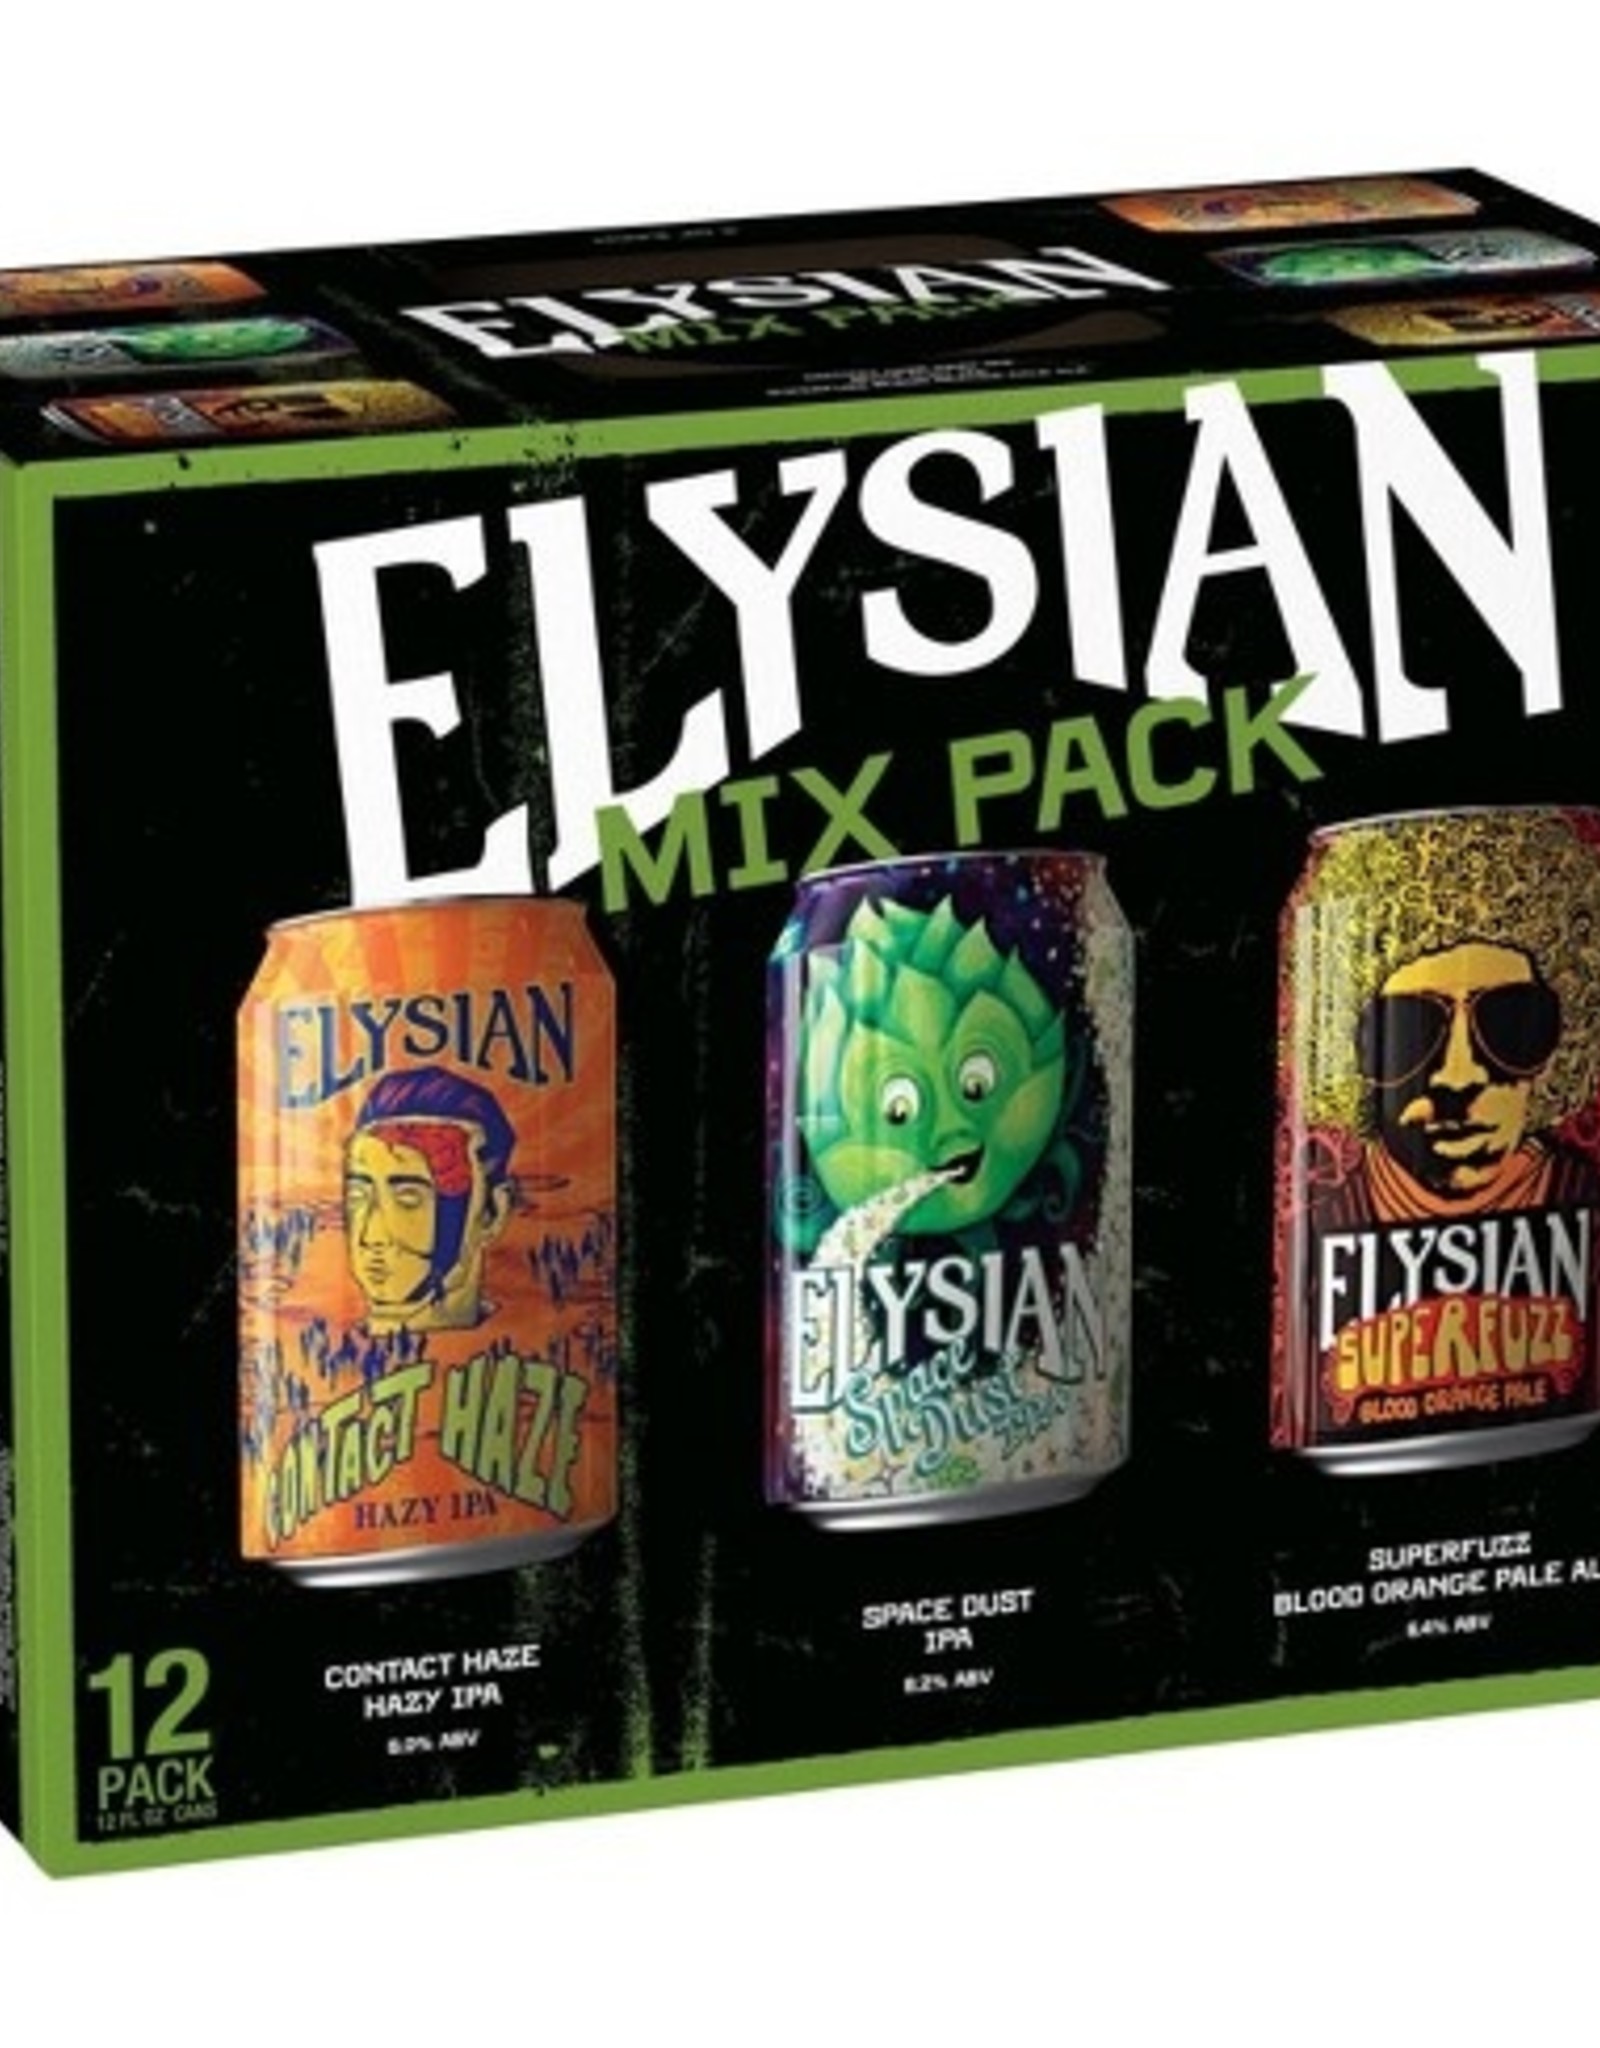 Elysian Variety Pack 12x12 oz cans